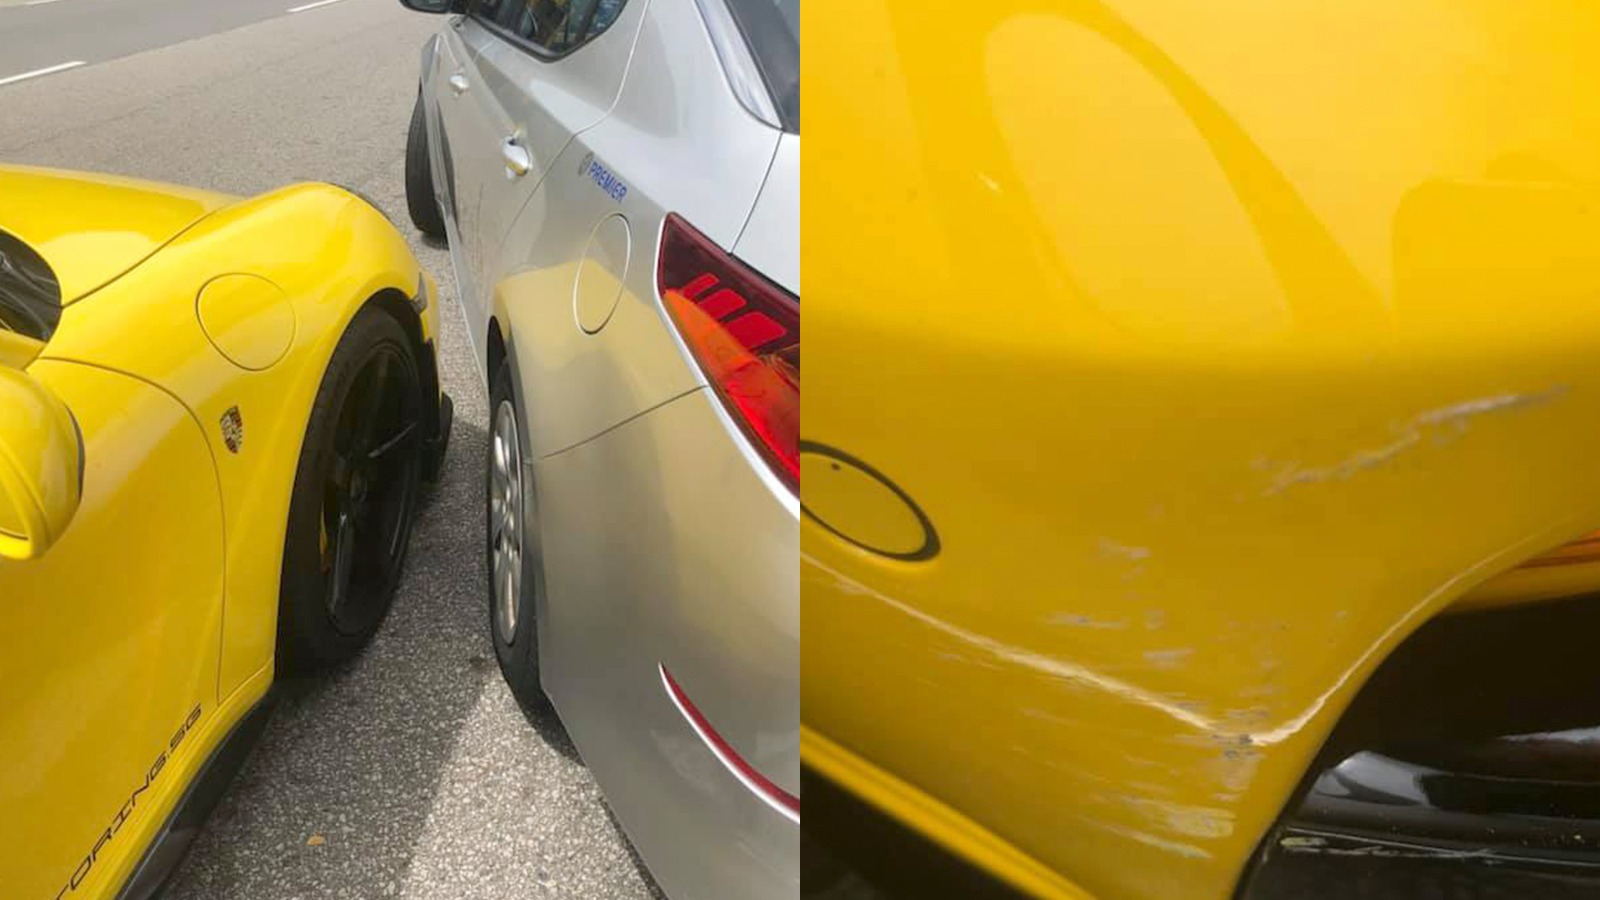 Kind Porsche driver charges just one dollar for damage to his car by taxi driver